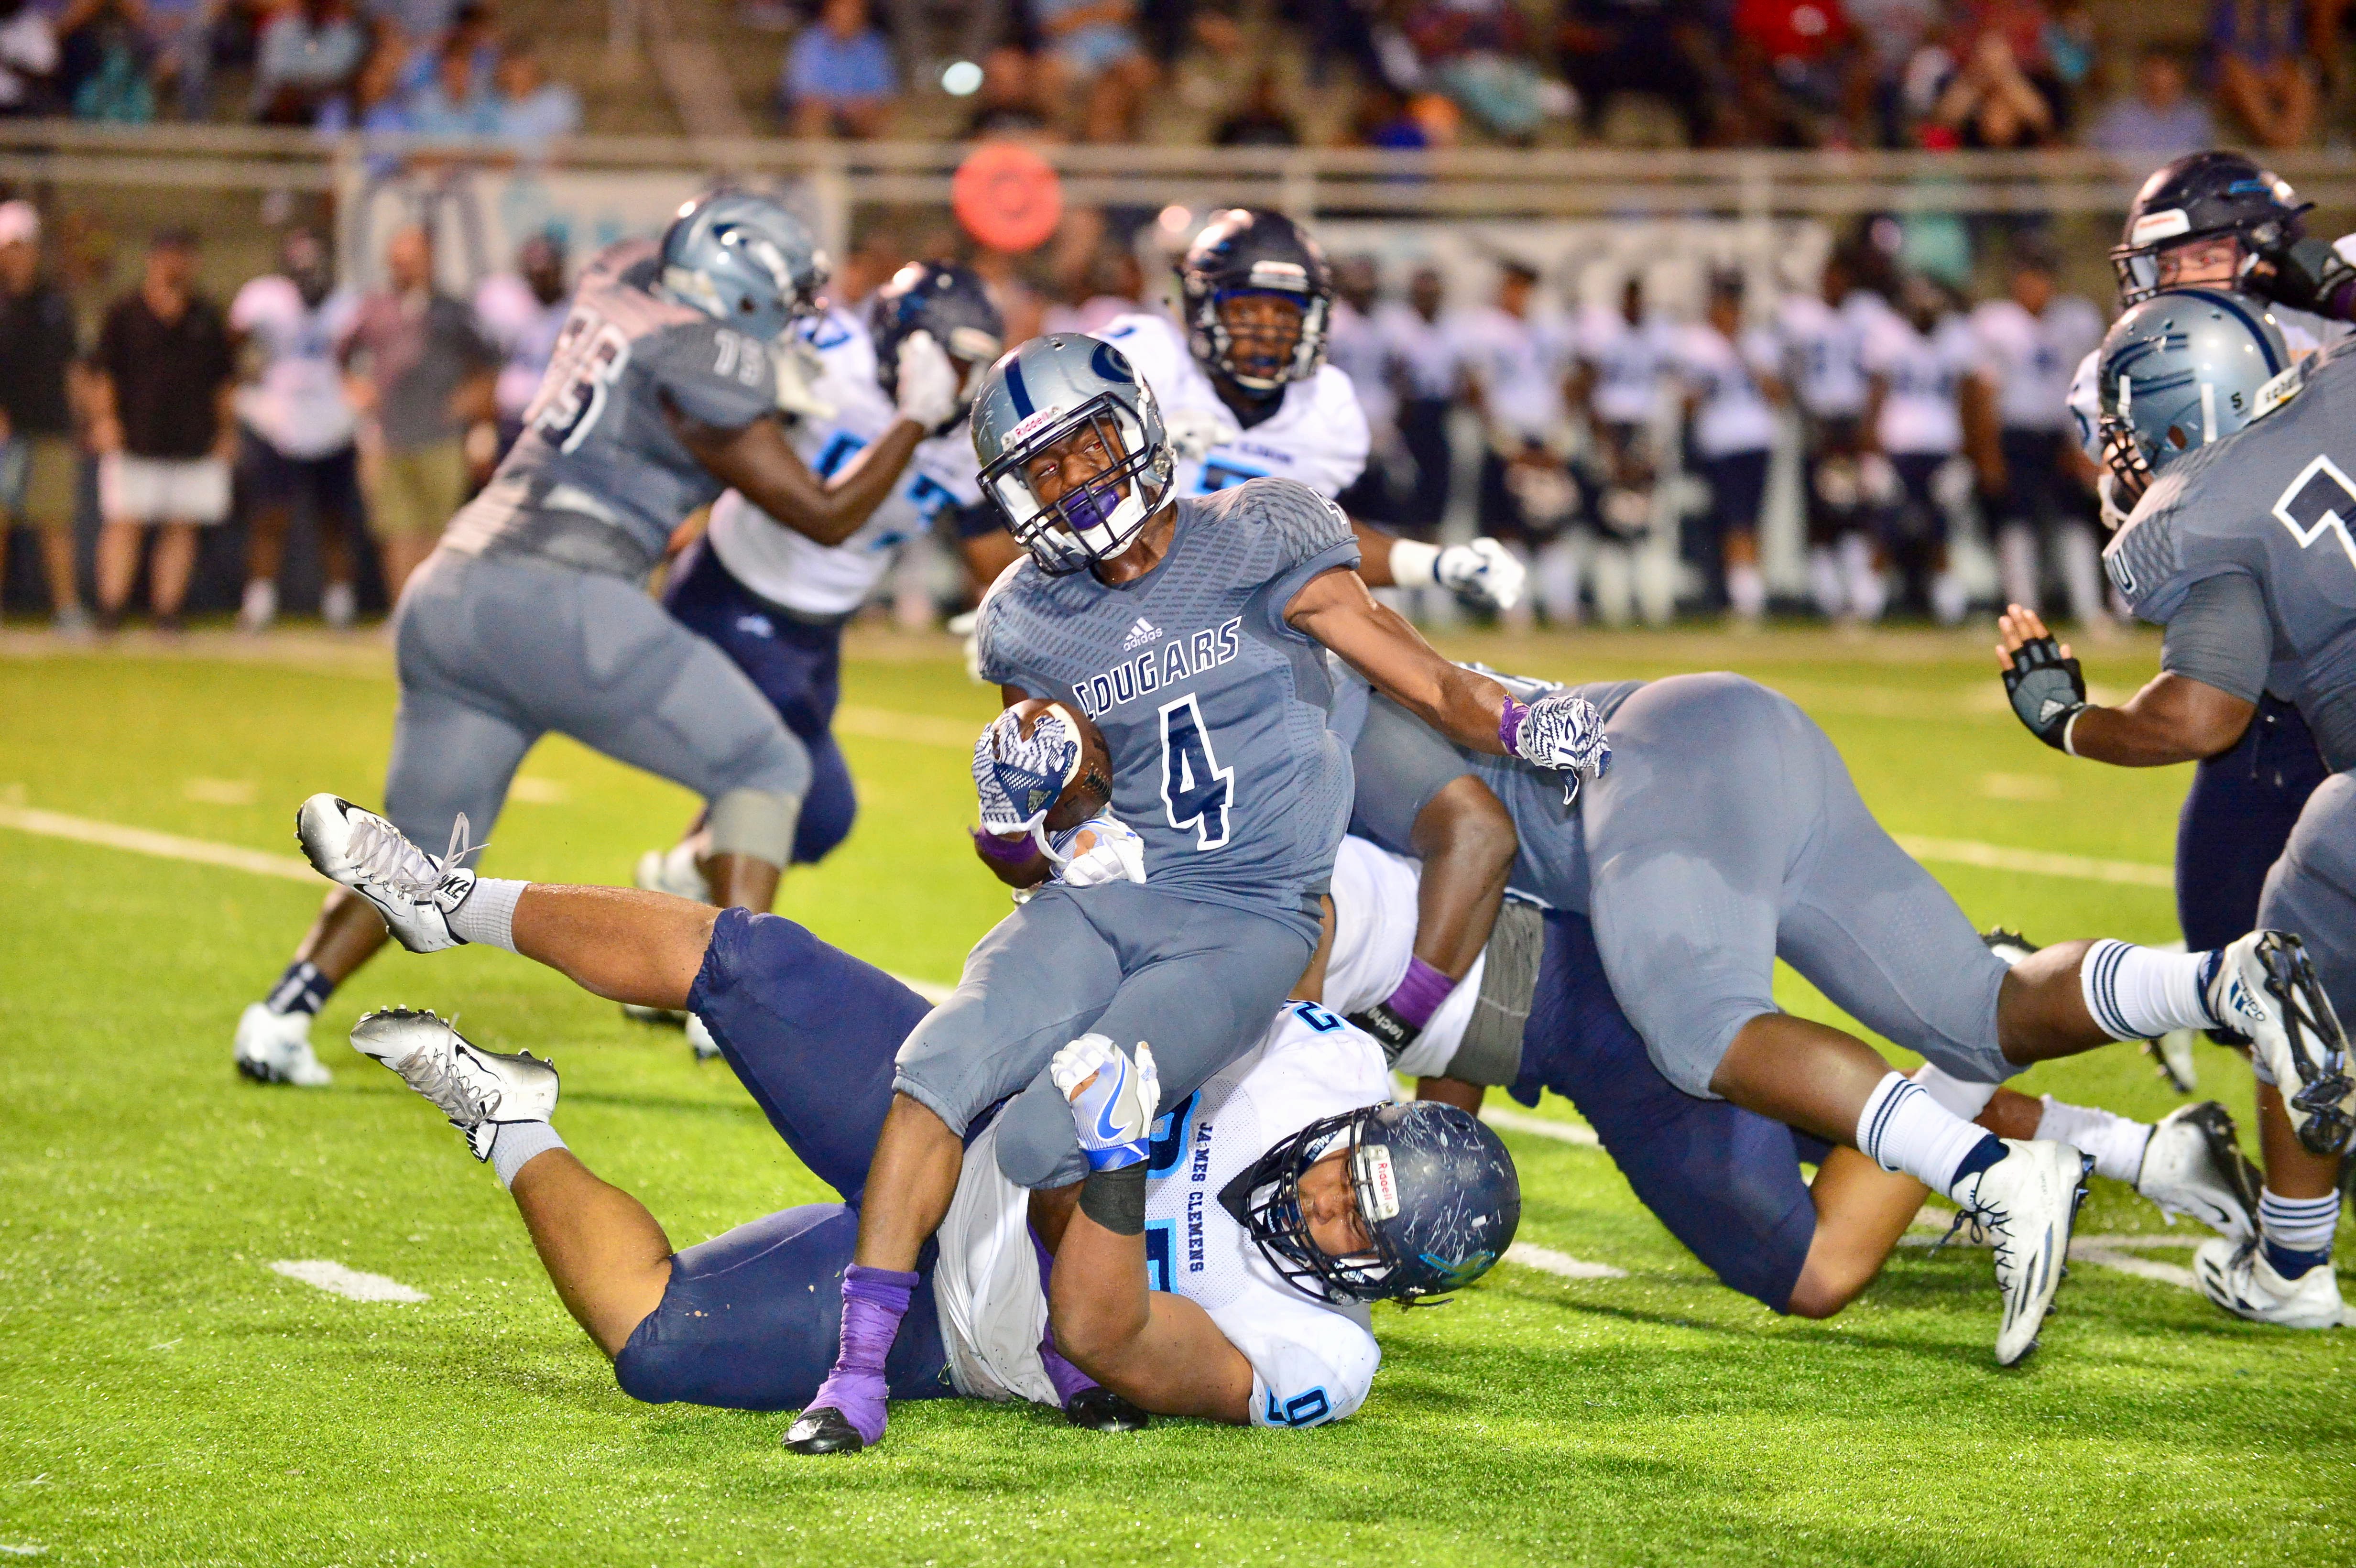 Clay-Chalkville falls to James Clemens 28-6